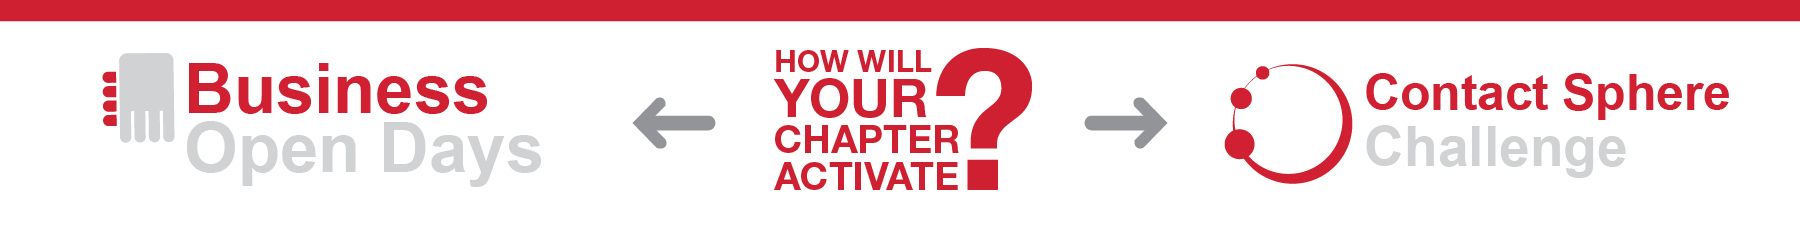 How will your chapter activate? Business Open Days or Contact Sphere Challenge